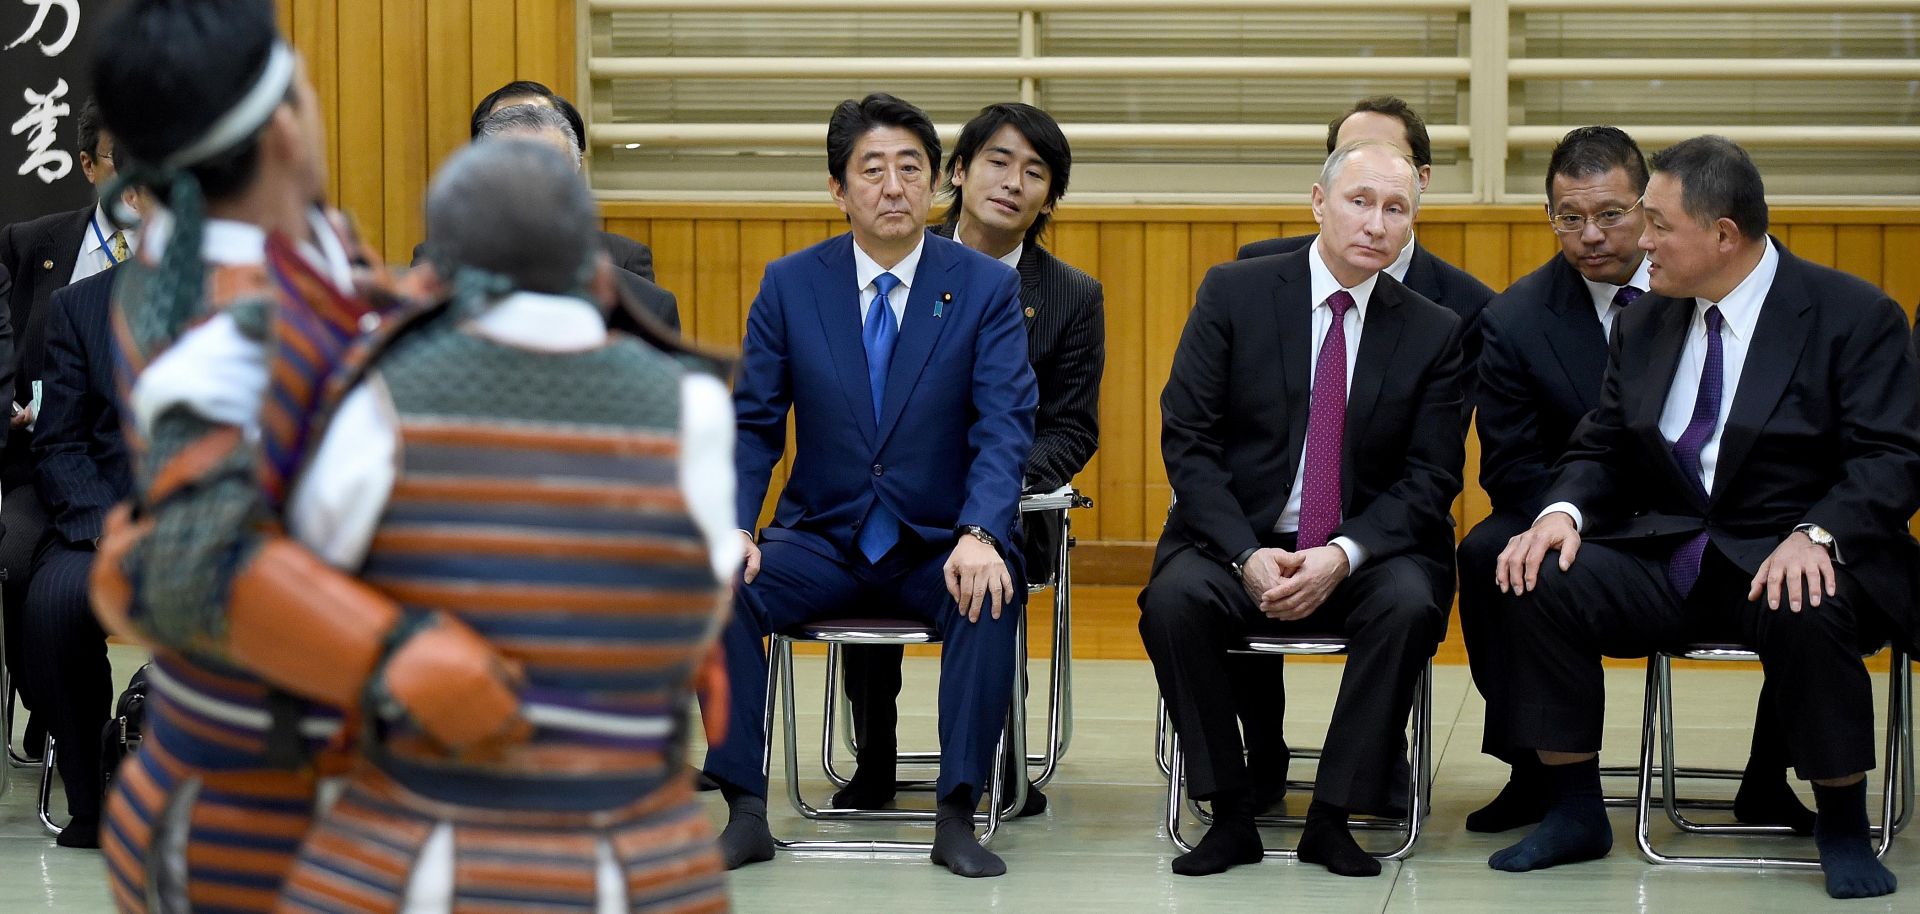 Japanese Prime Minister Shinzo Abe, third from right, and Russian President Vladimir Putin watch a judo performance in Tokyo on Dec. 16, 2016.